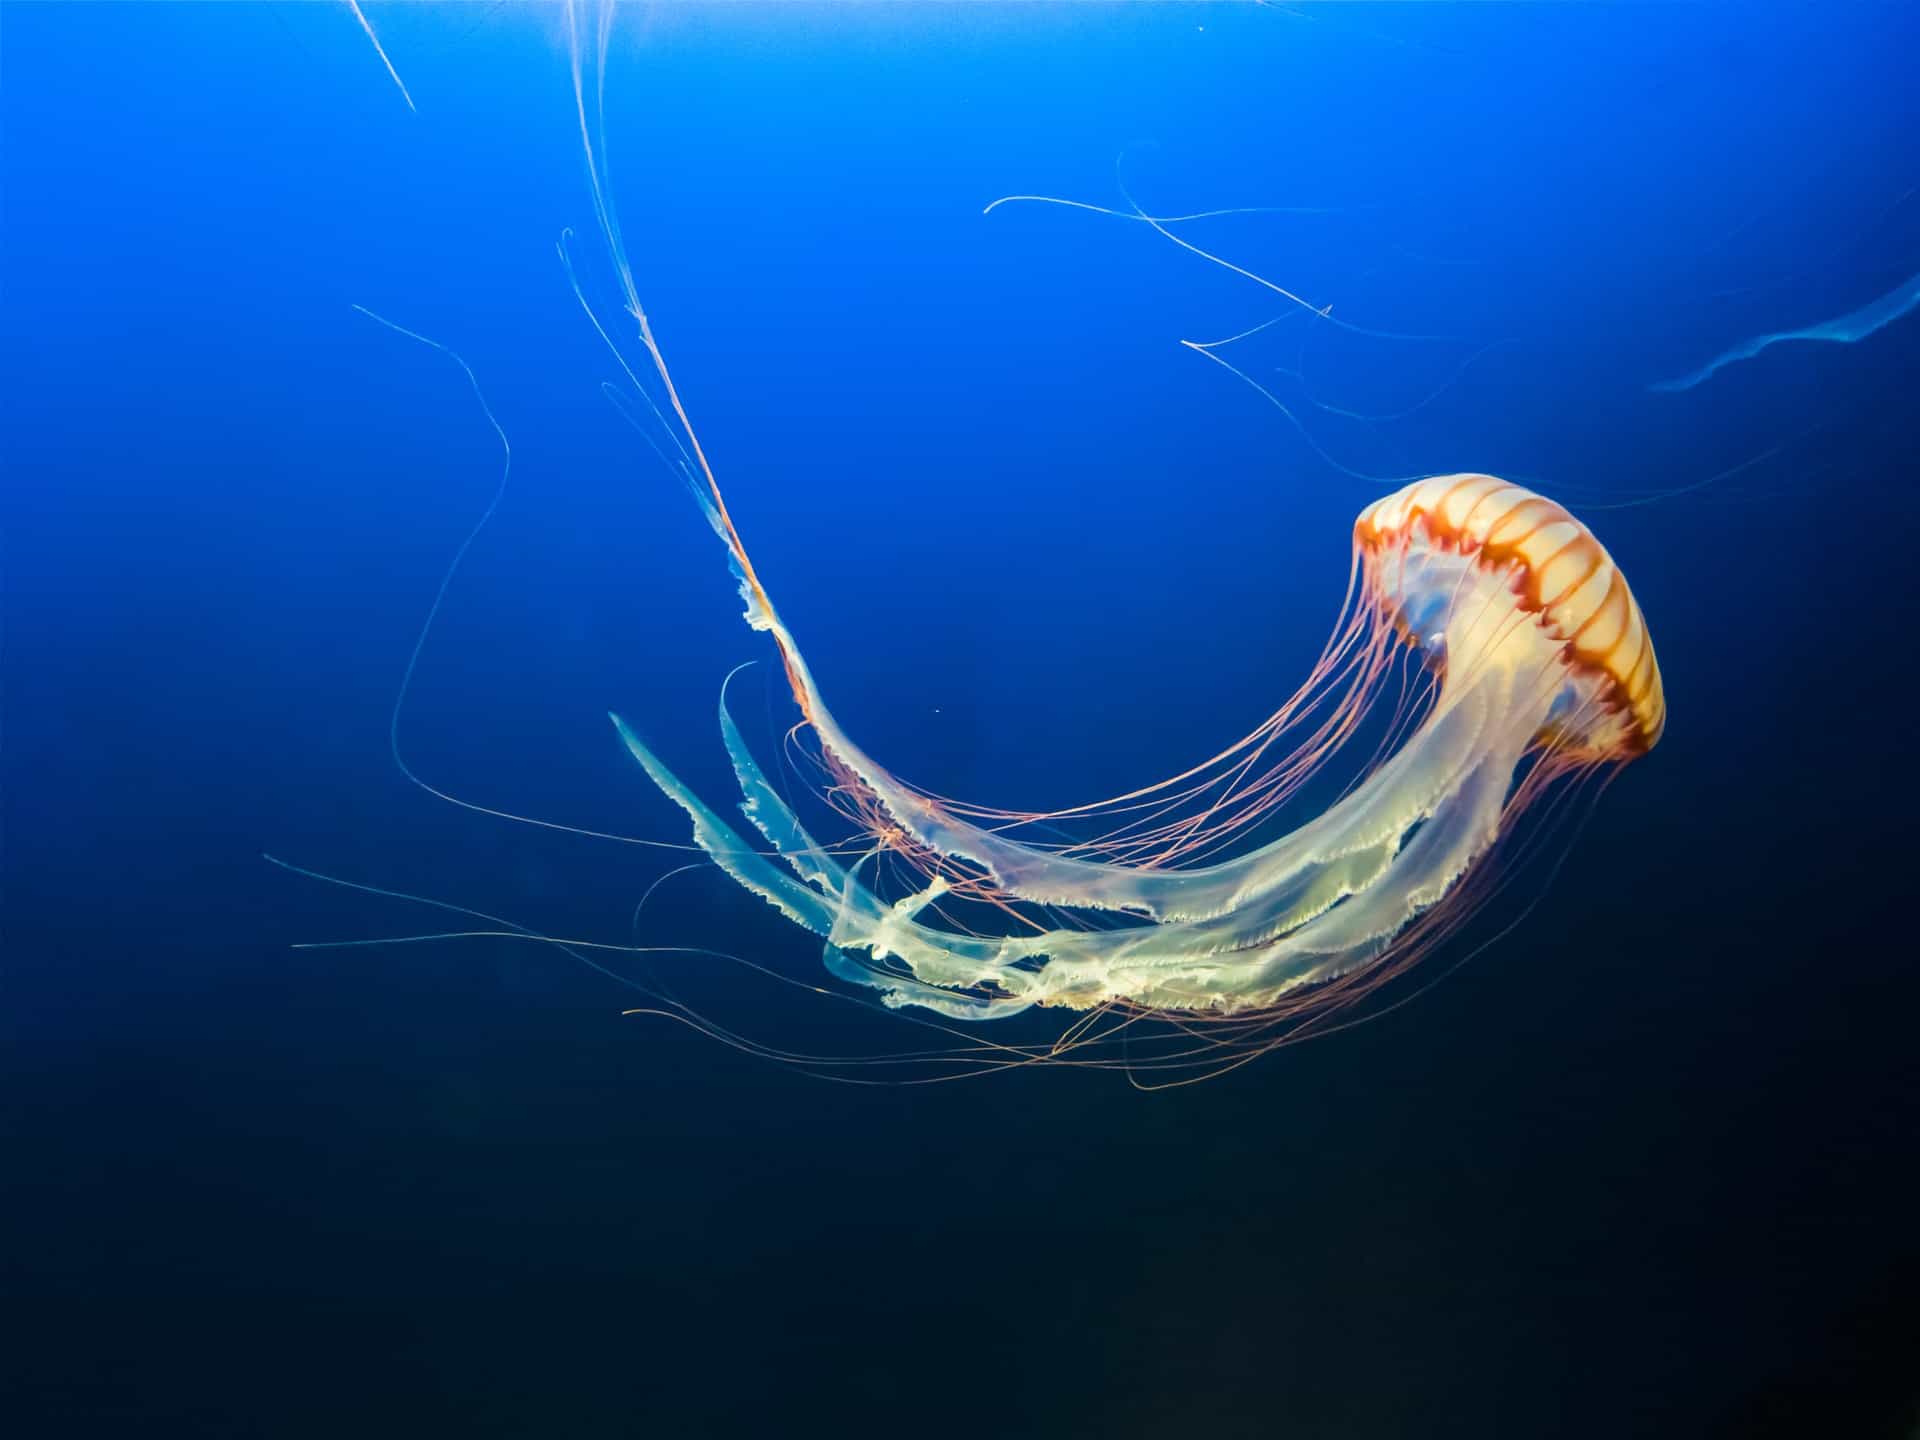 research article about jellyfish